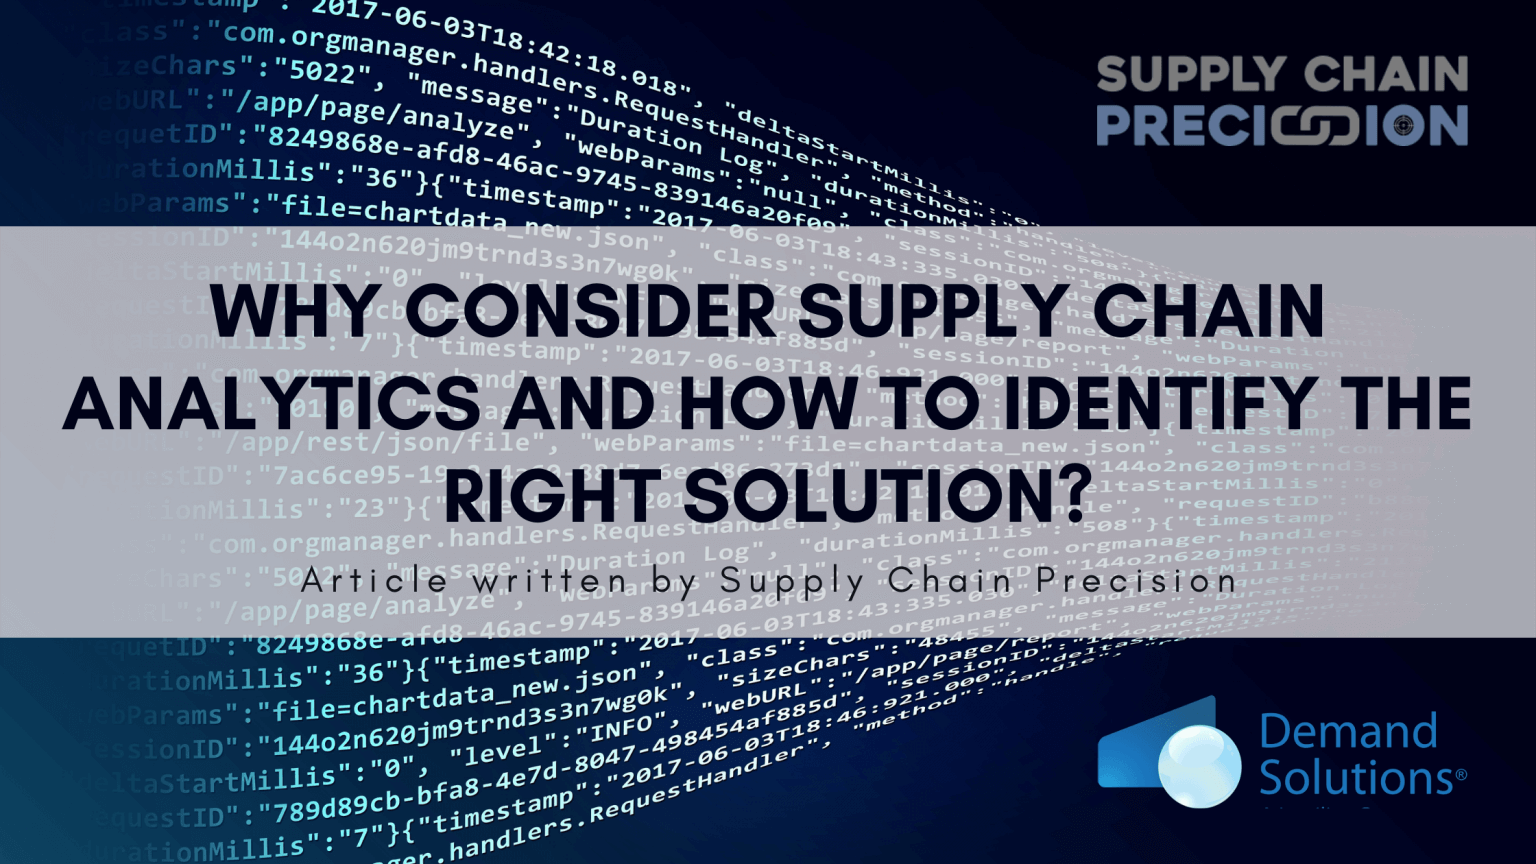 Why Consider Supply Chain Analytics And How To Identify The Right Solution?